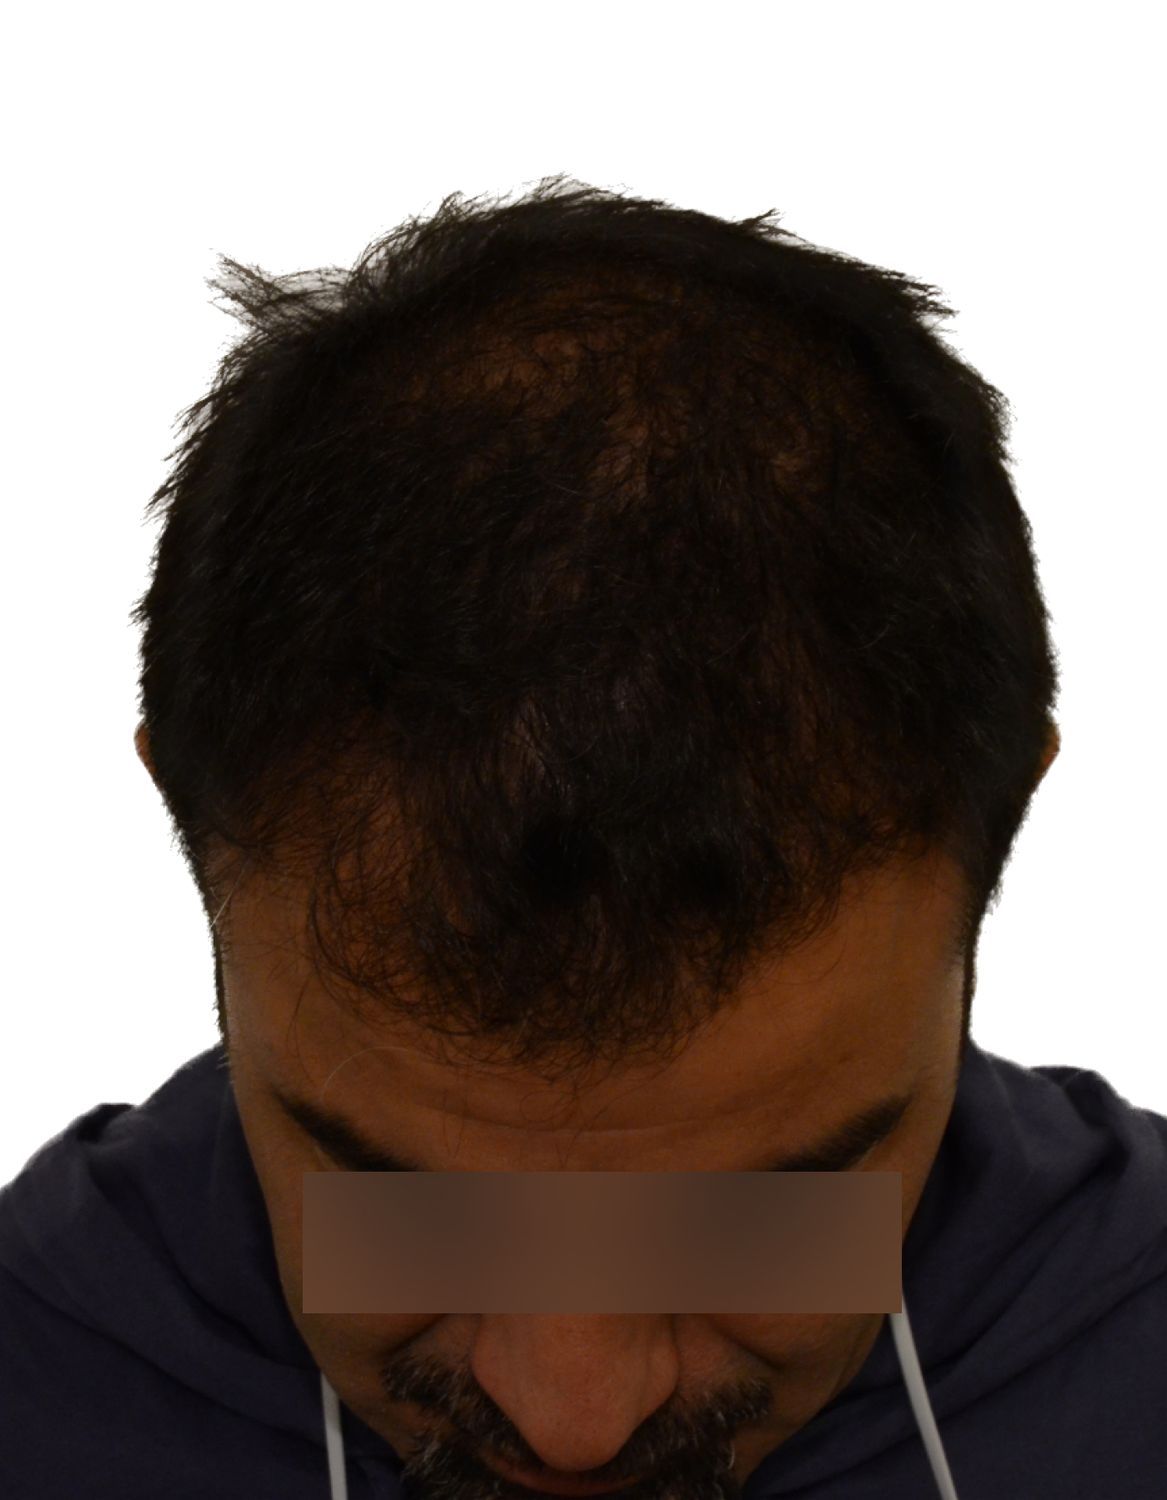 hair transplant after